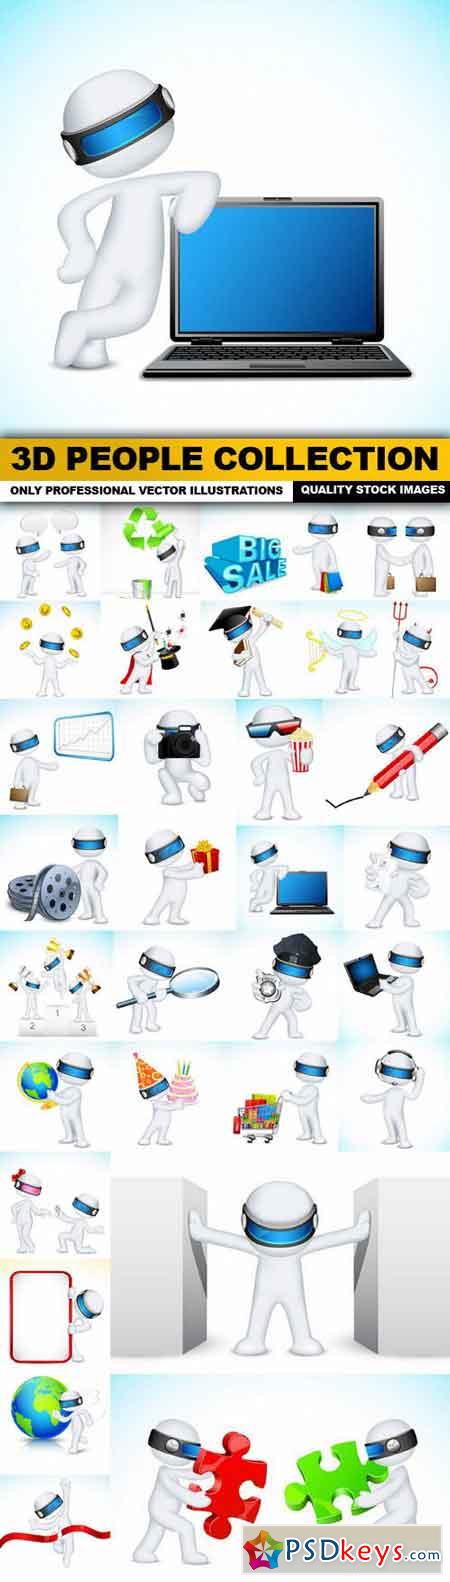 3D People Collection - 30 Vector